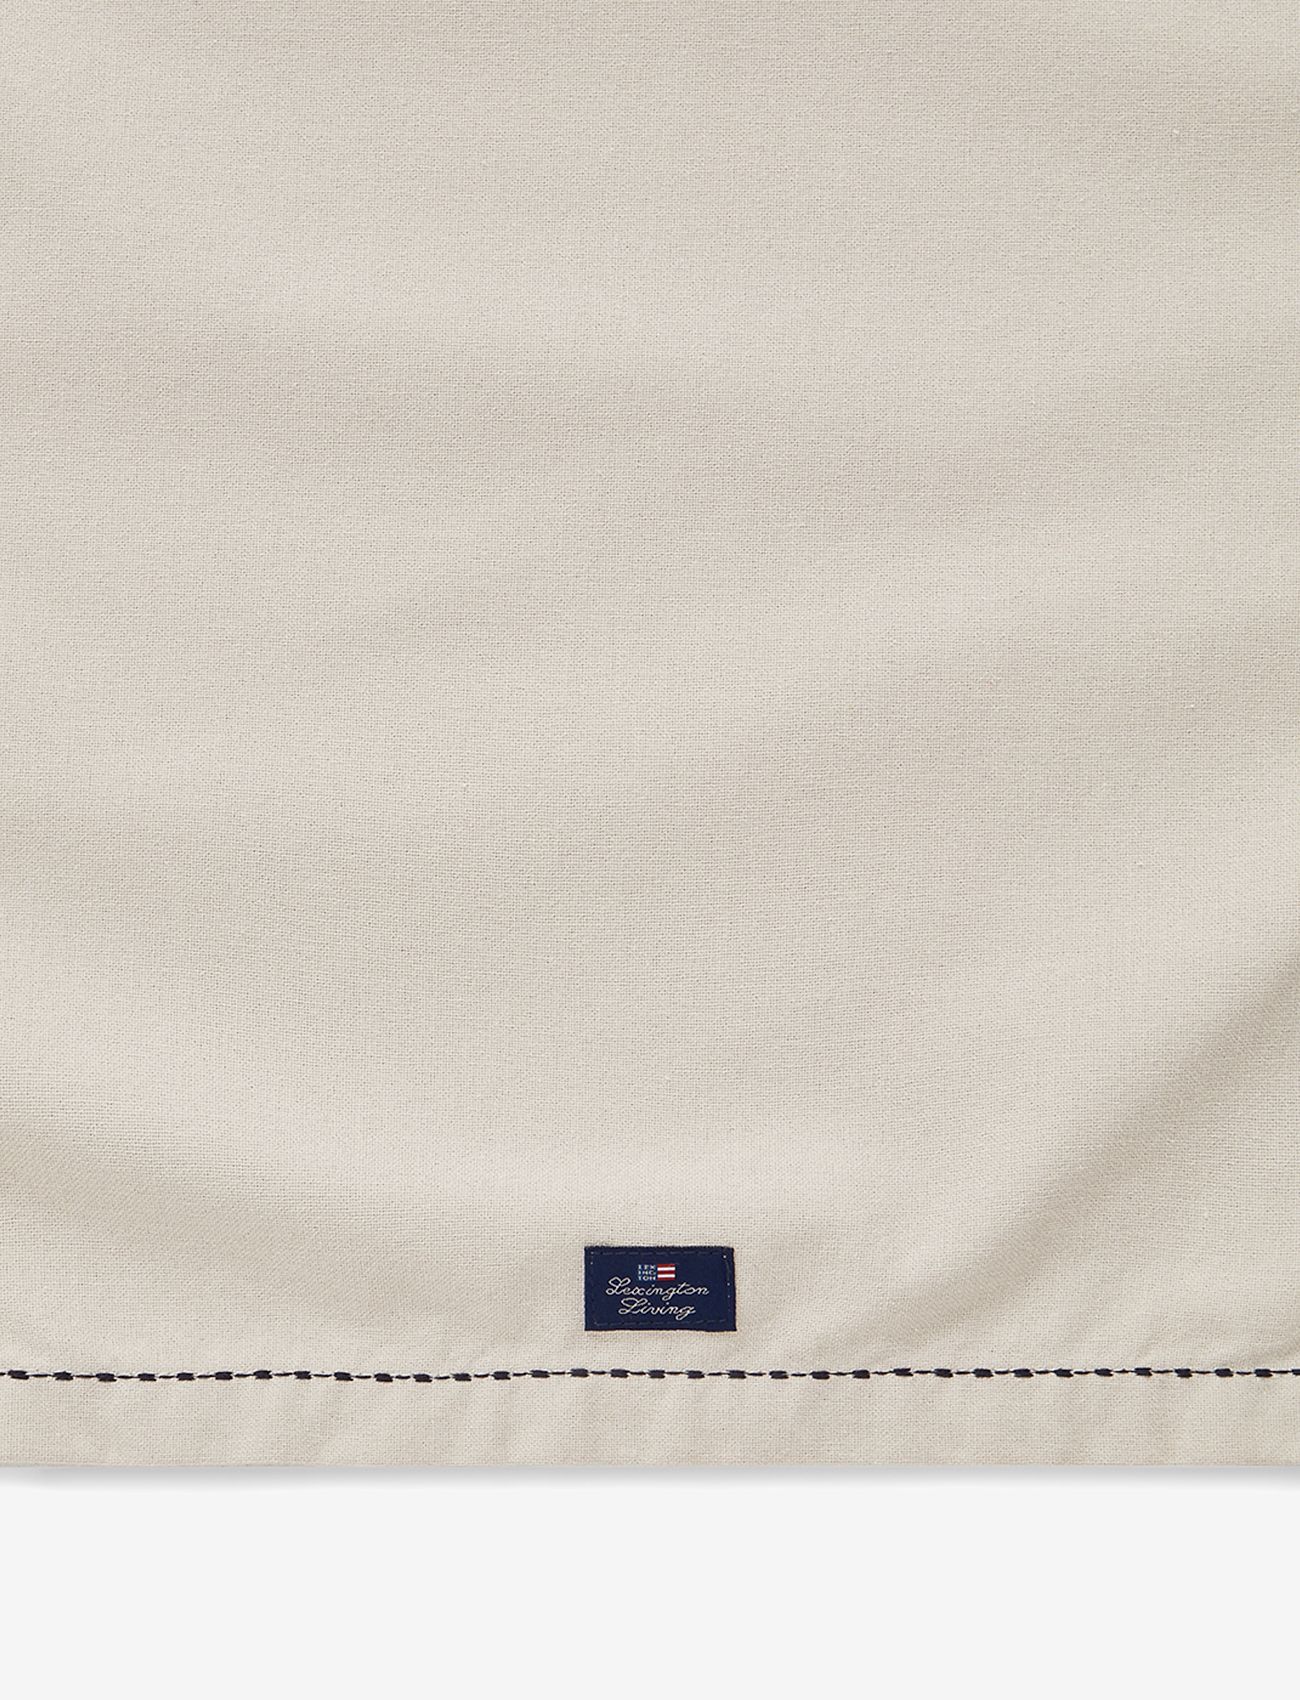 Lexington Home - Organic Cotton Oxford Runner with Heavy Stitches - laudlinad - beige - 1